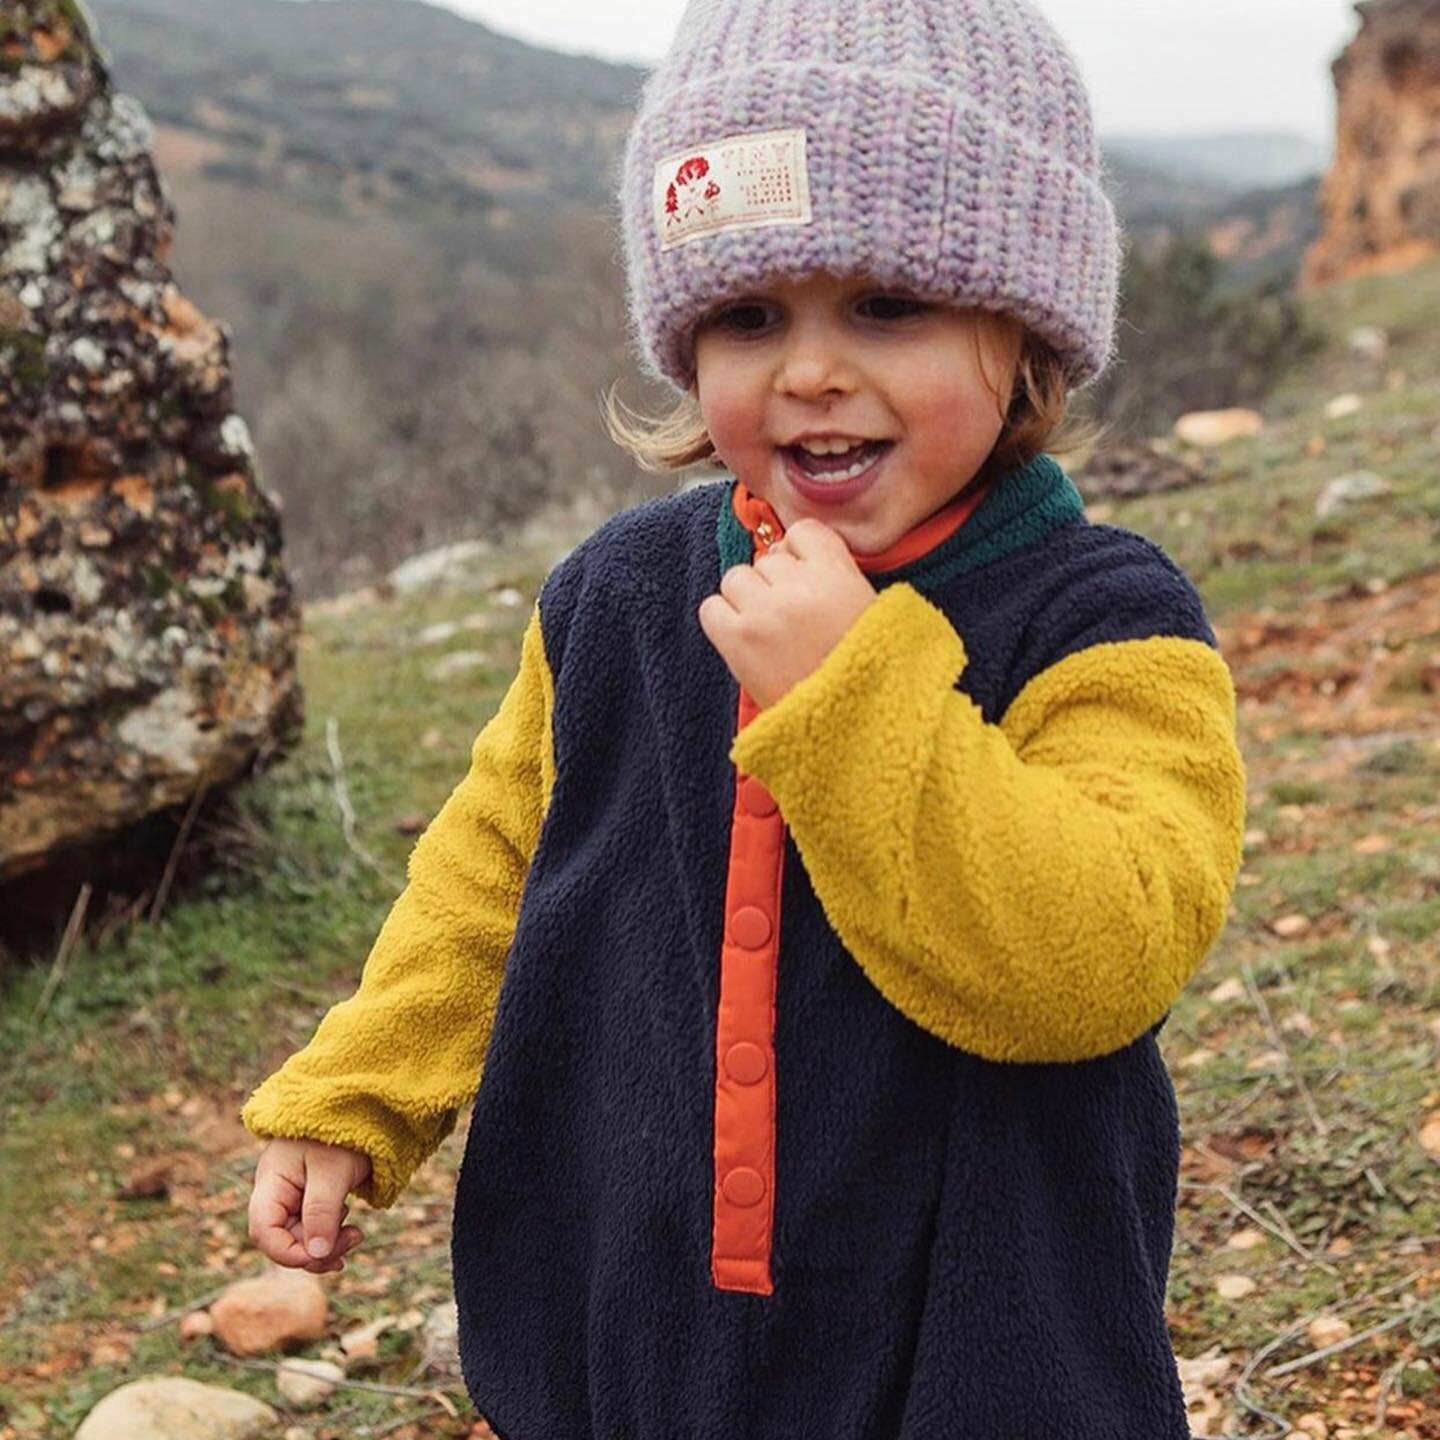 Drop 2 of the @tinycottons AW21 collection, Tiny Explorers, is now available!

DM us to find your nearest Tiny Cottons retailer 💛

#tinycottons #tinyexplorers #bebold #expeditiontiny #tinyadventures #expedition #adventure #sustainablefashion #aw21 #